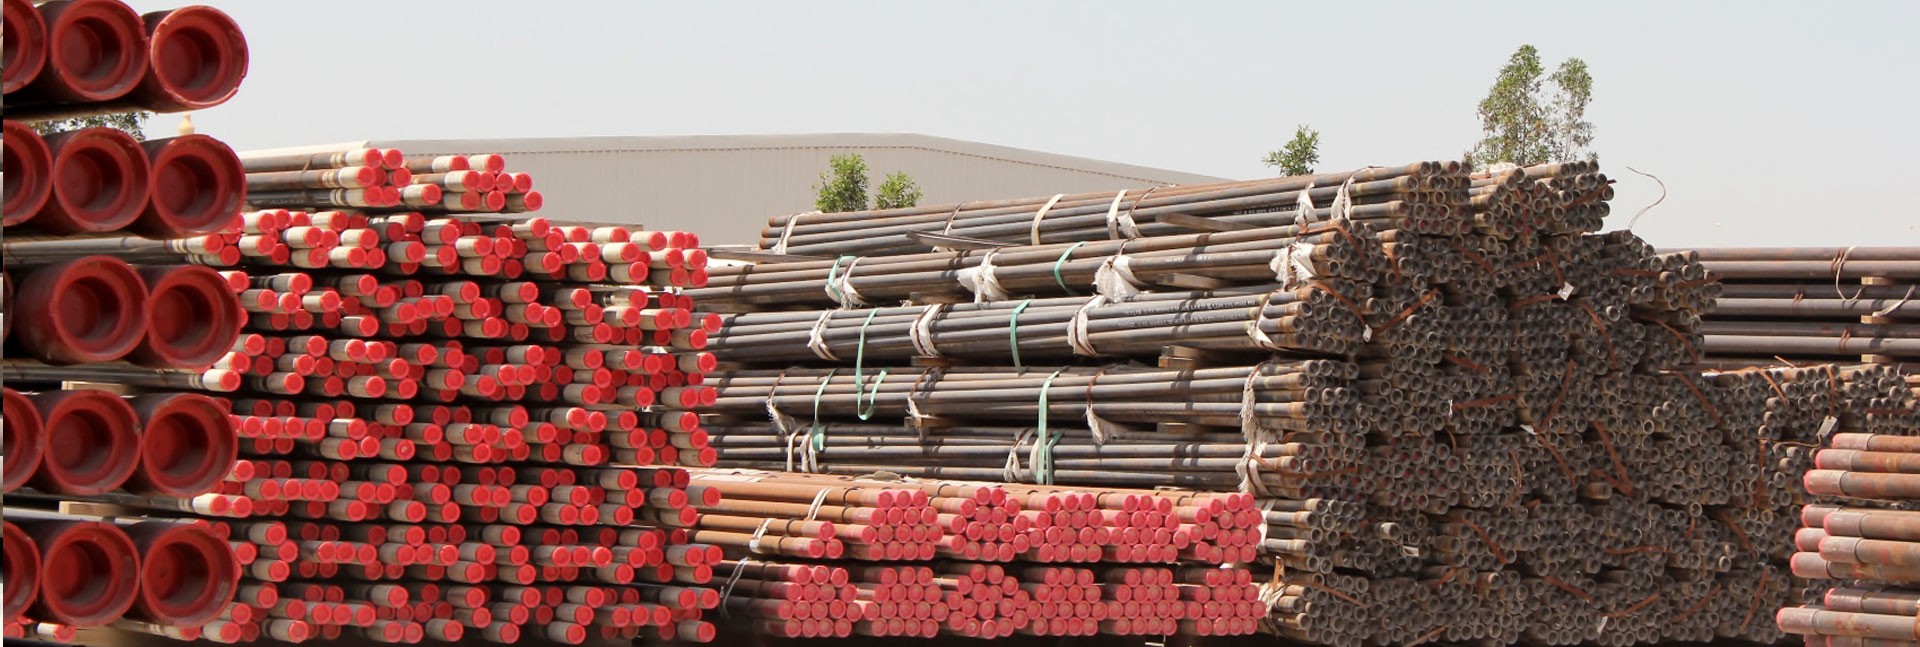 Get most Comprehensive Variety in Alloy Steel Pipe,300+ Sizes & Grades in Alloy Steel Seamless Pipes